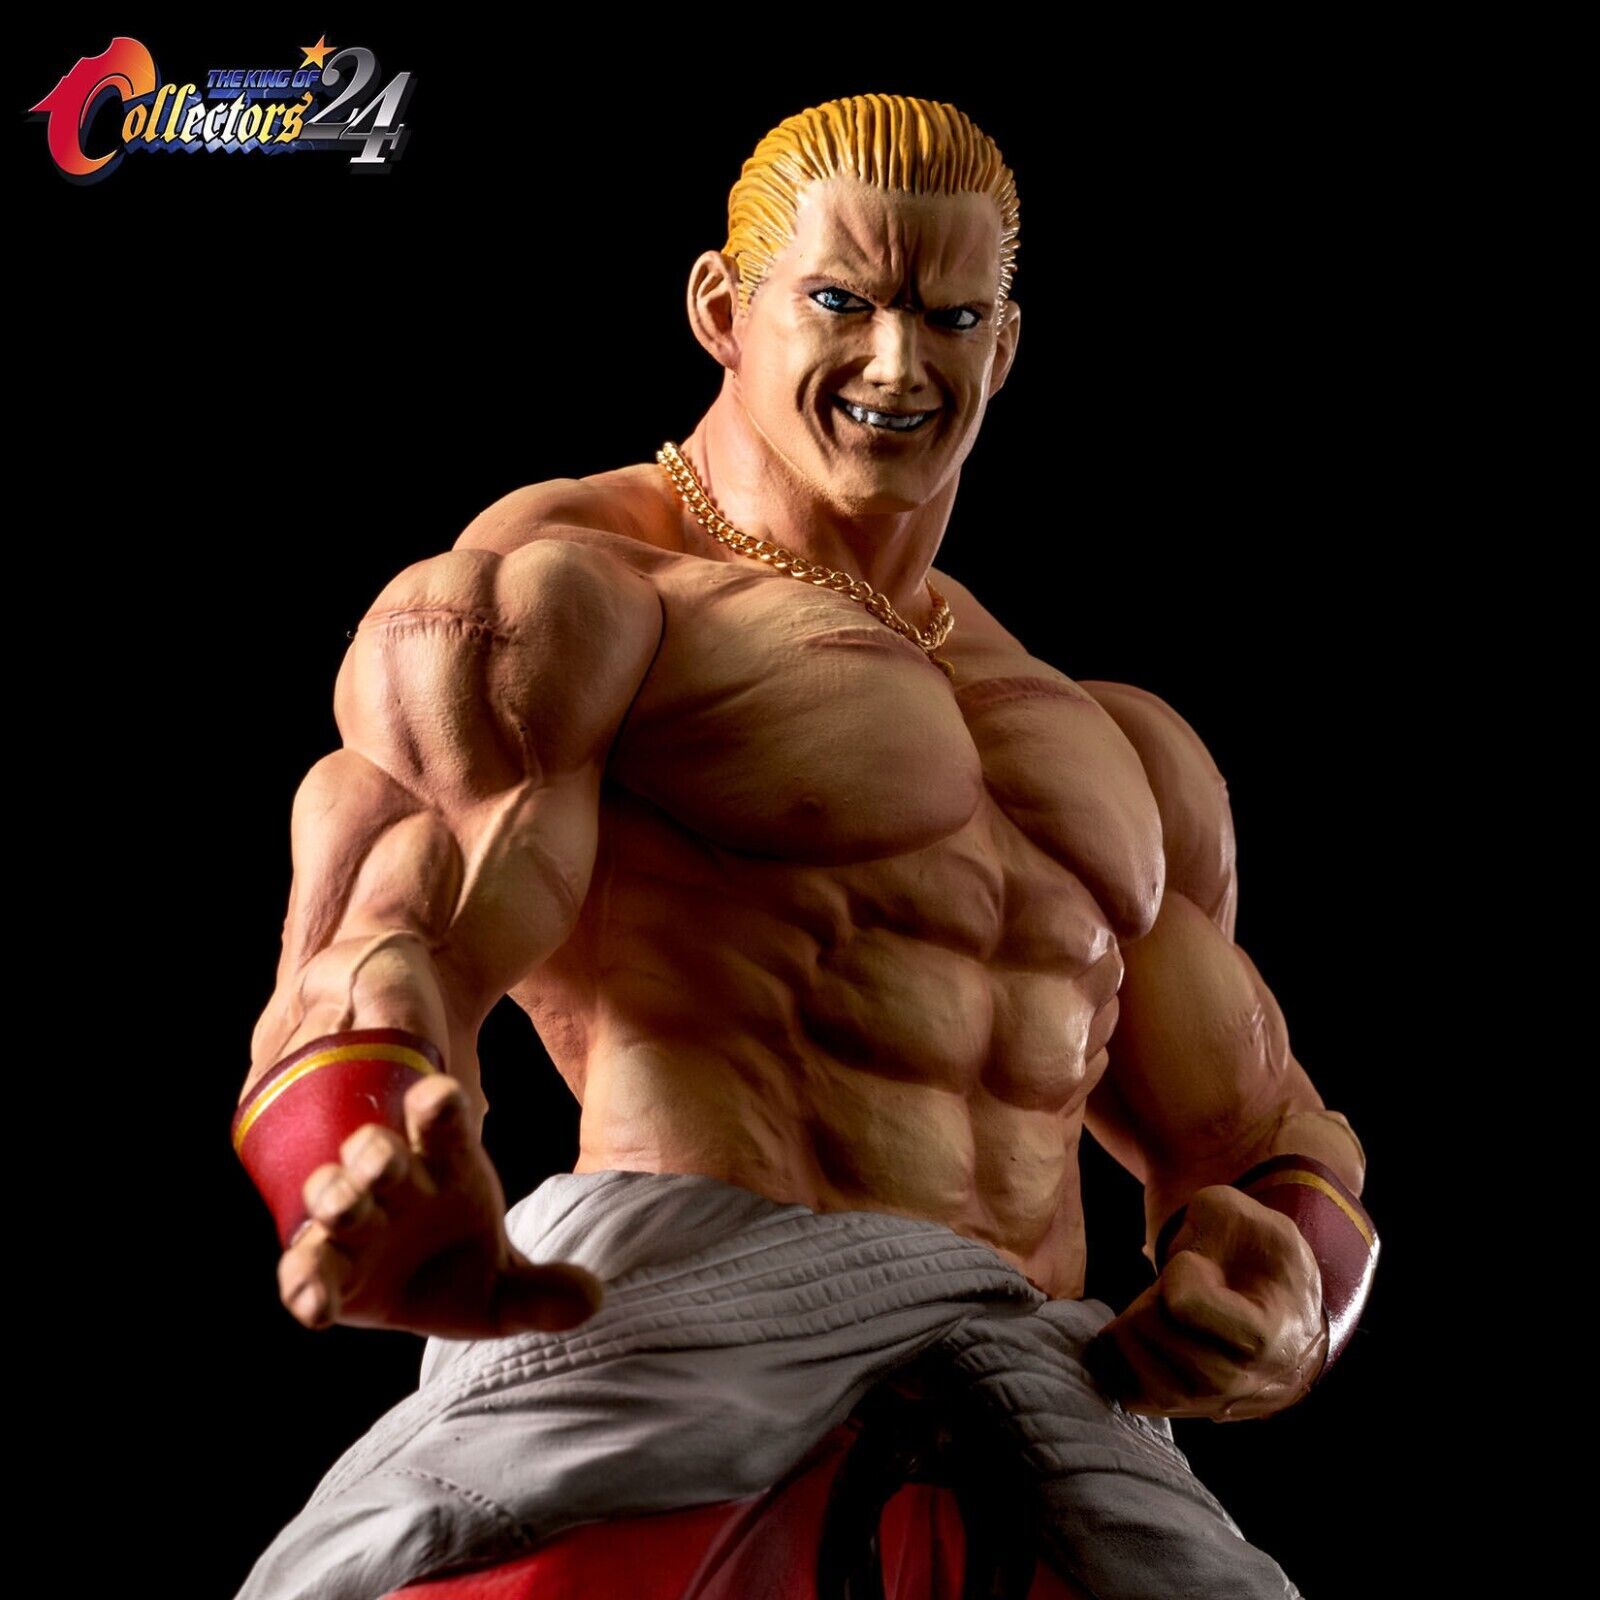 STUDIO24 THE KING OF COLLECTORS\'24 Fatal Fury SPECIAL Geese Howard NEW